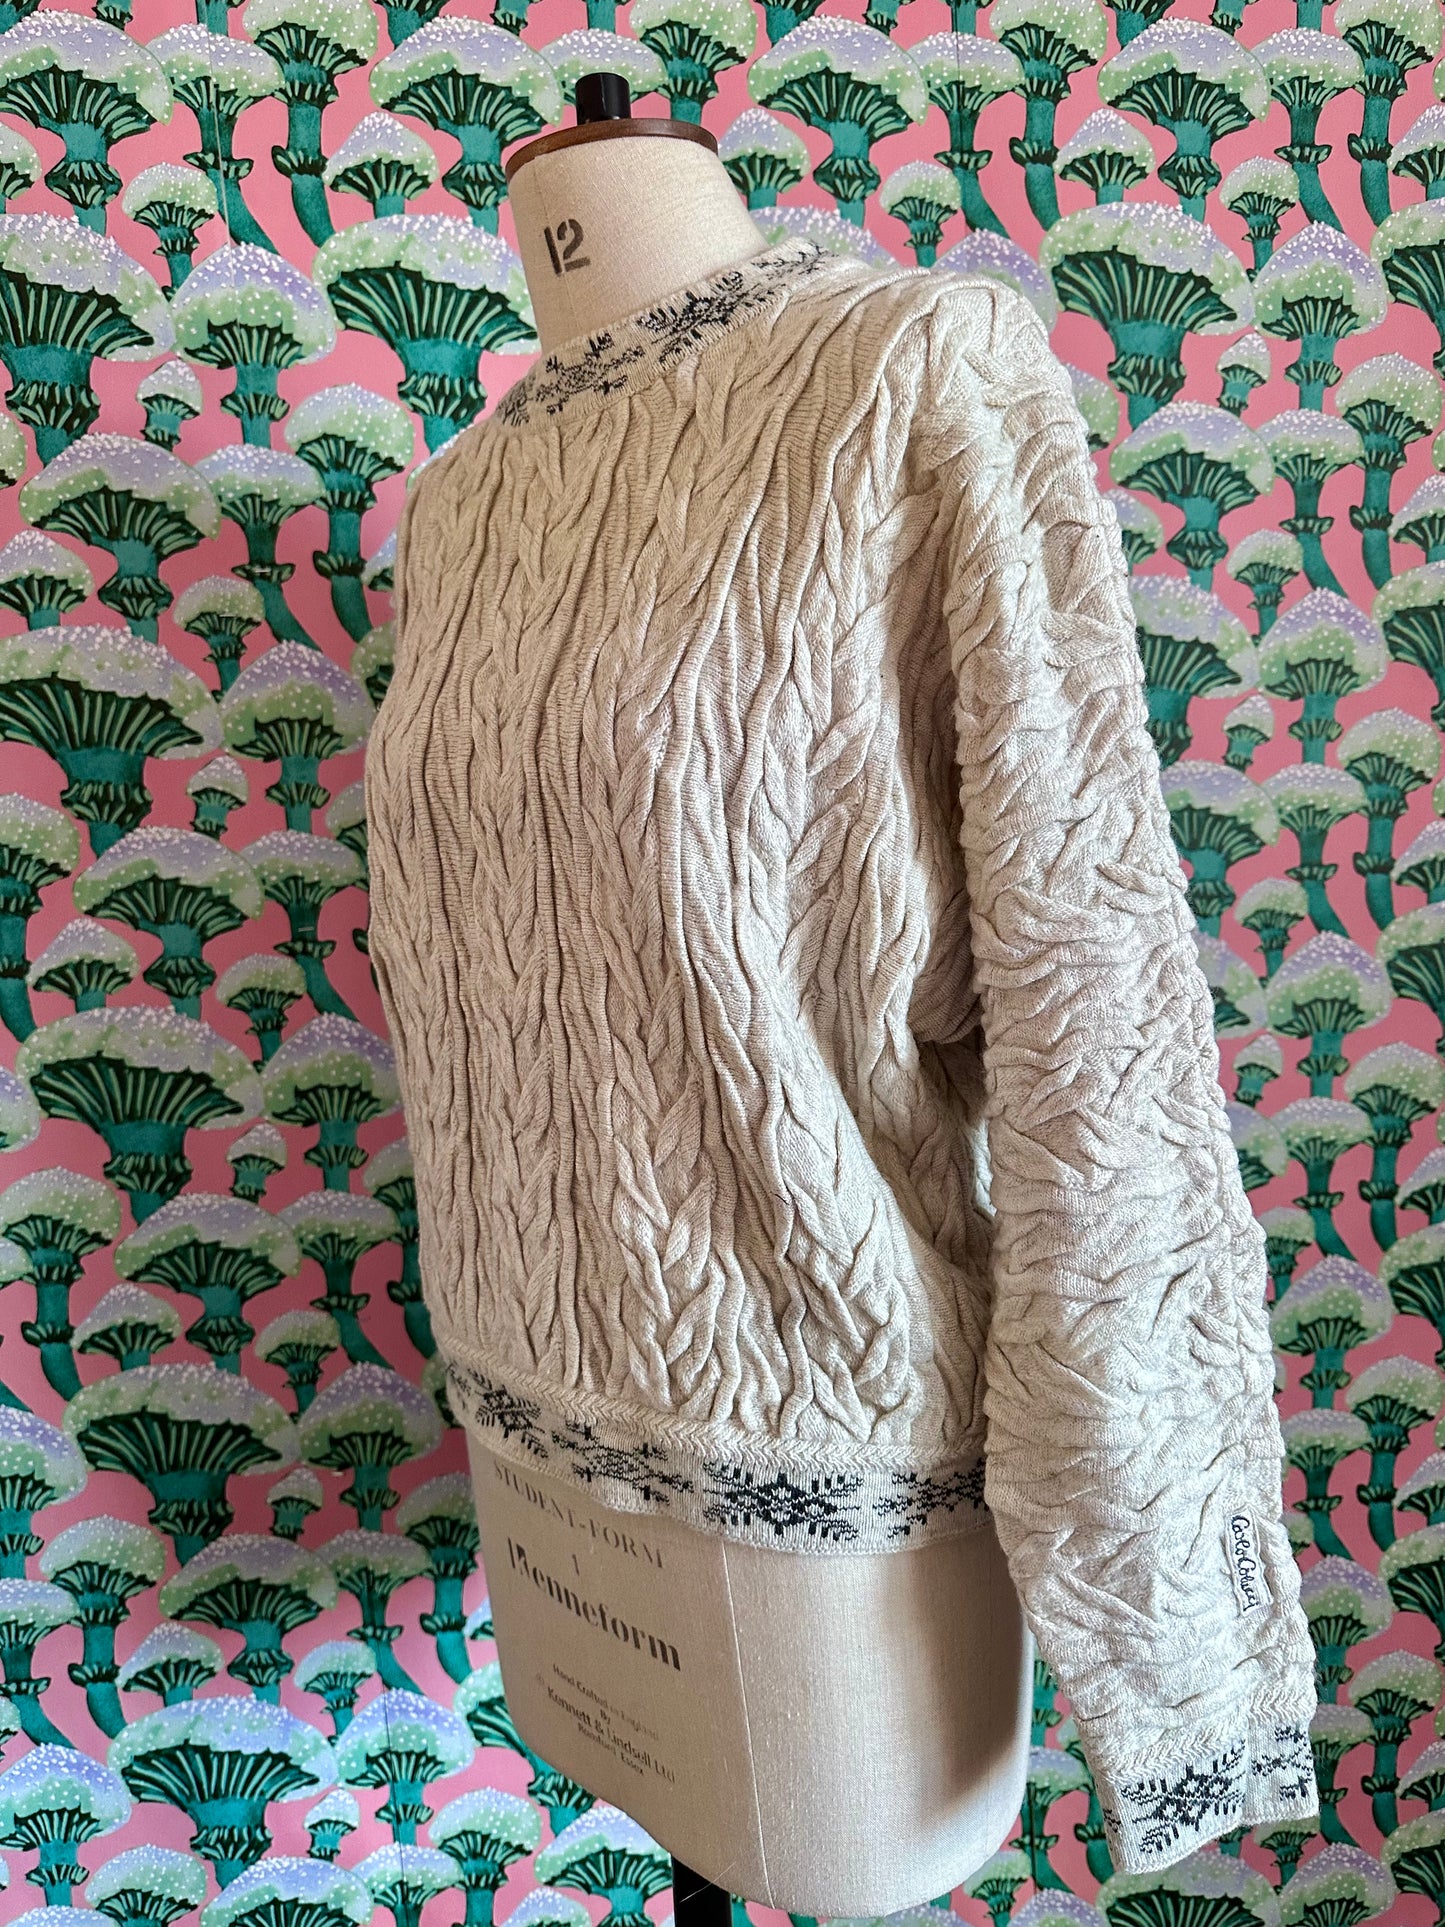 90s 3D Knit Textured Sweater by Carlo Colucci